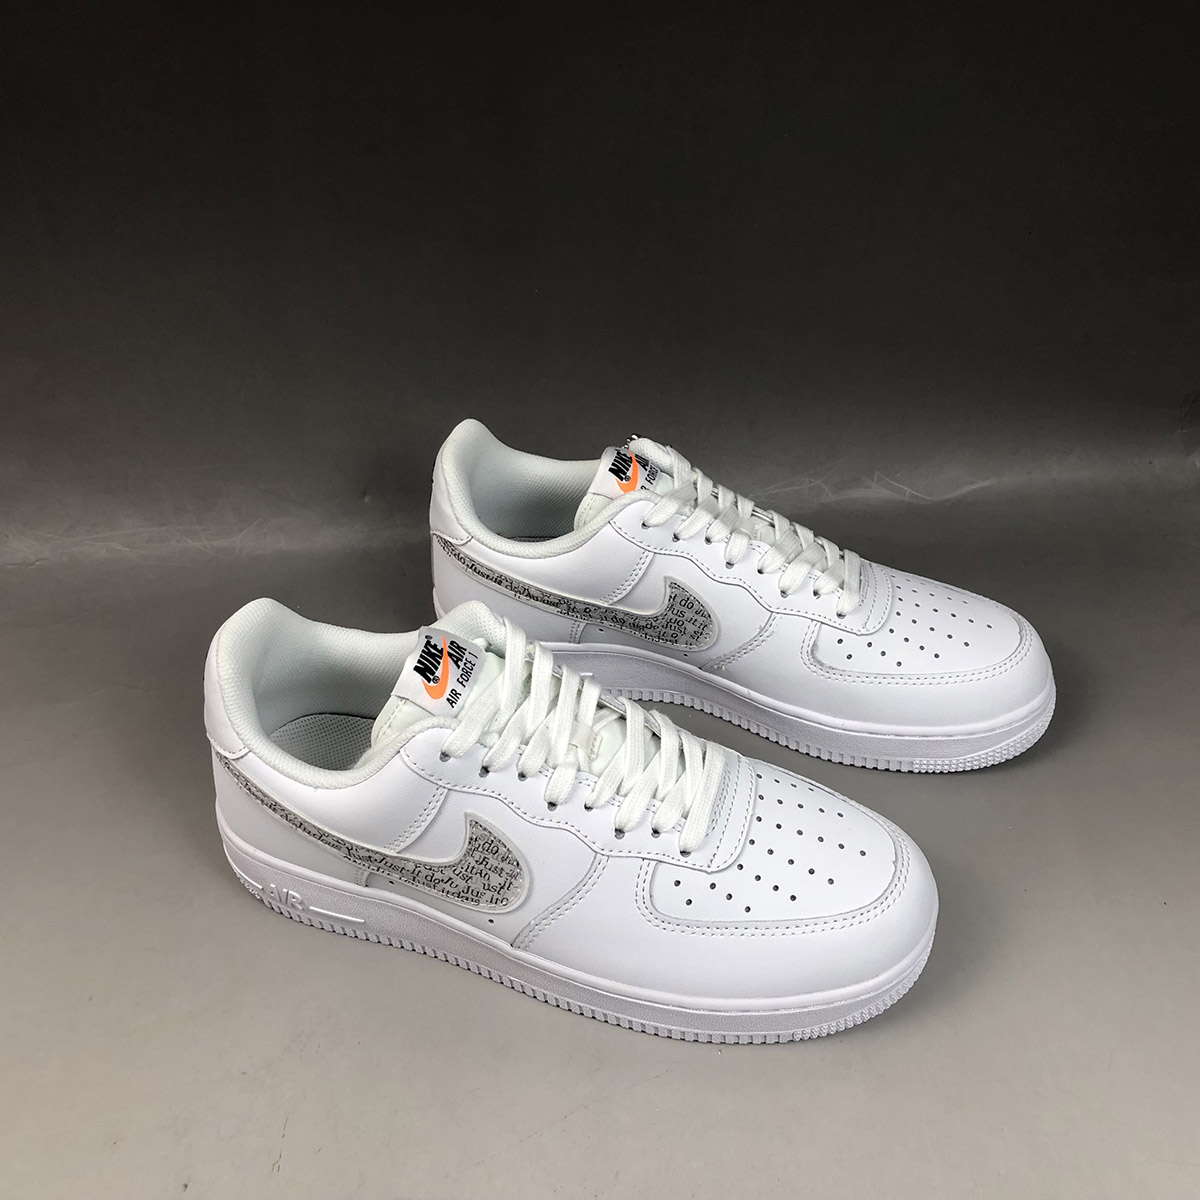 Nike Air Force 1 LV8 'Just Do it' White 